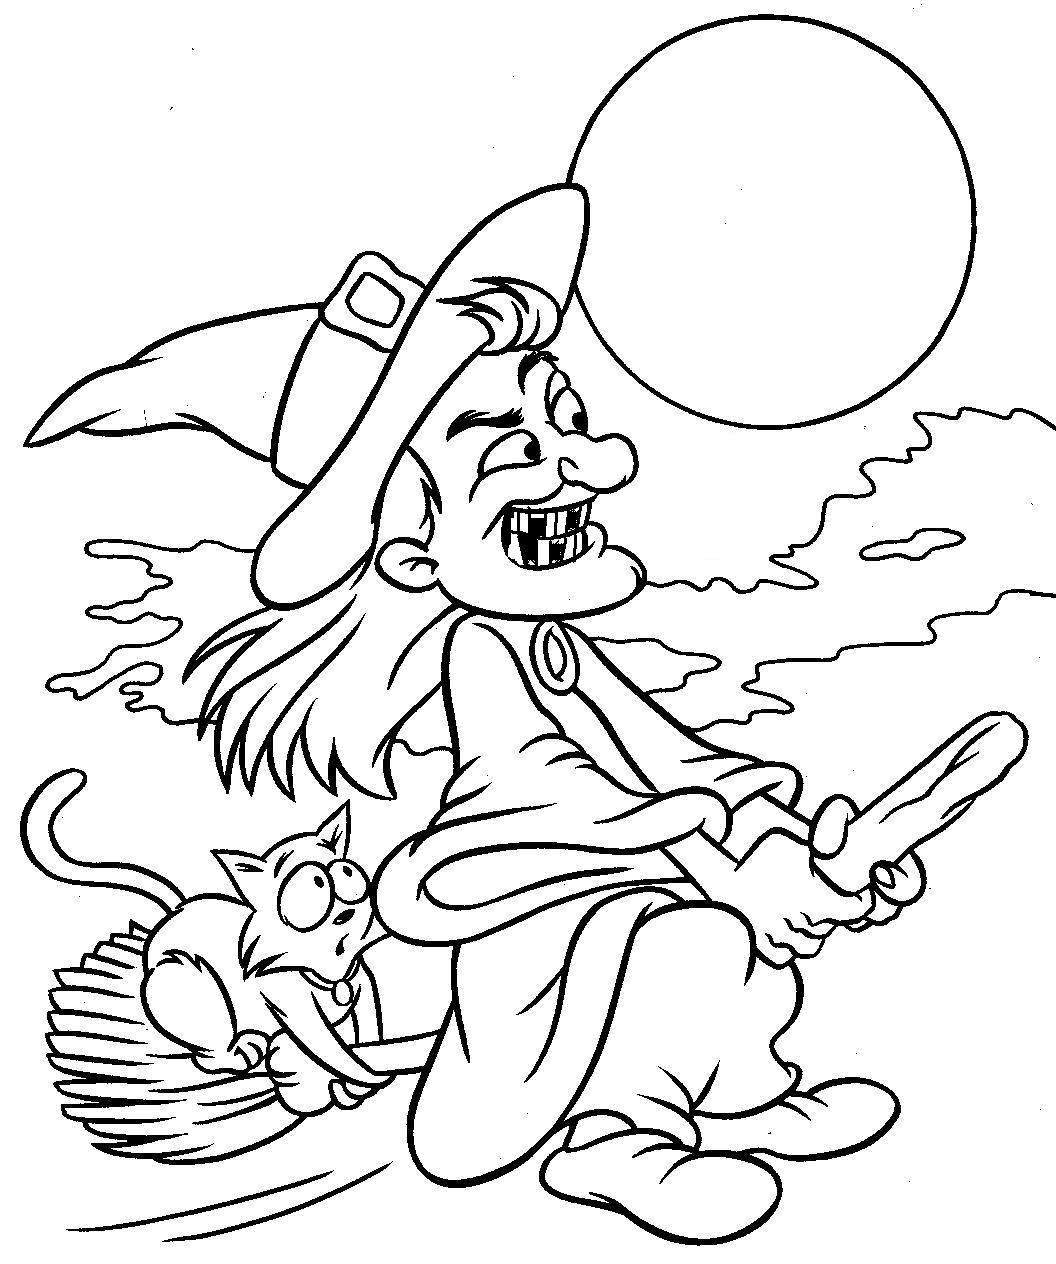 Halloween Colouring Pages for Kids